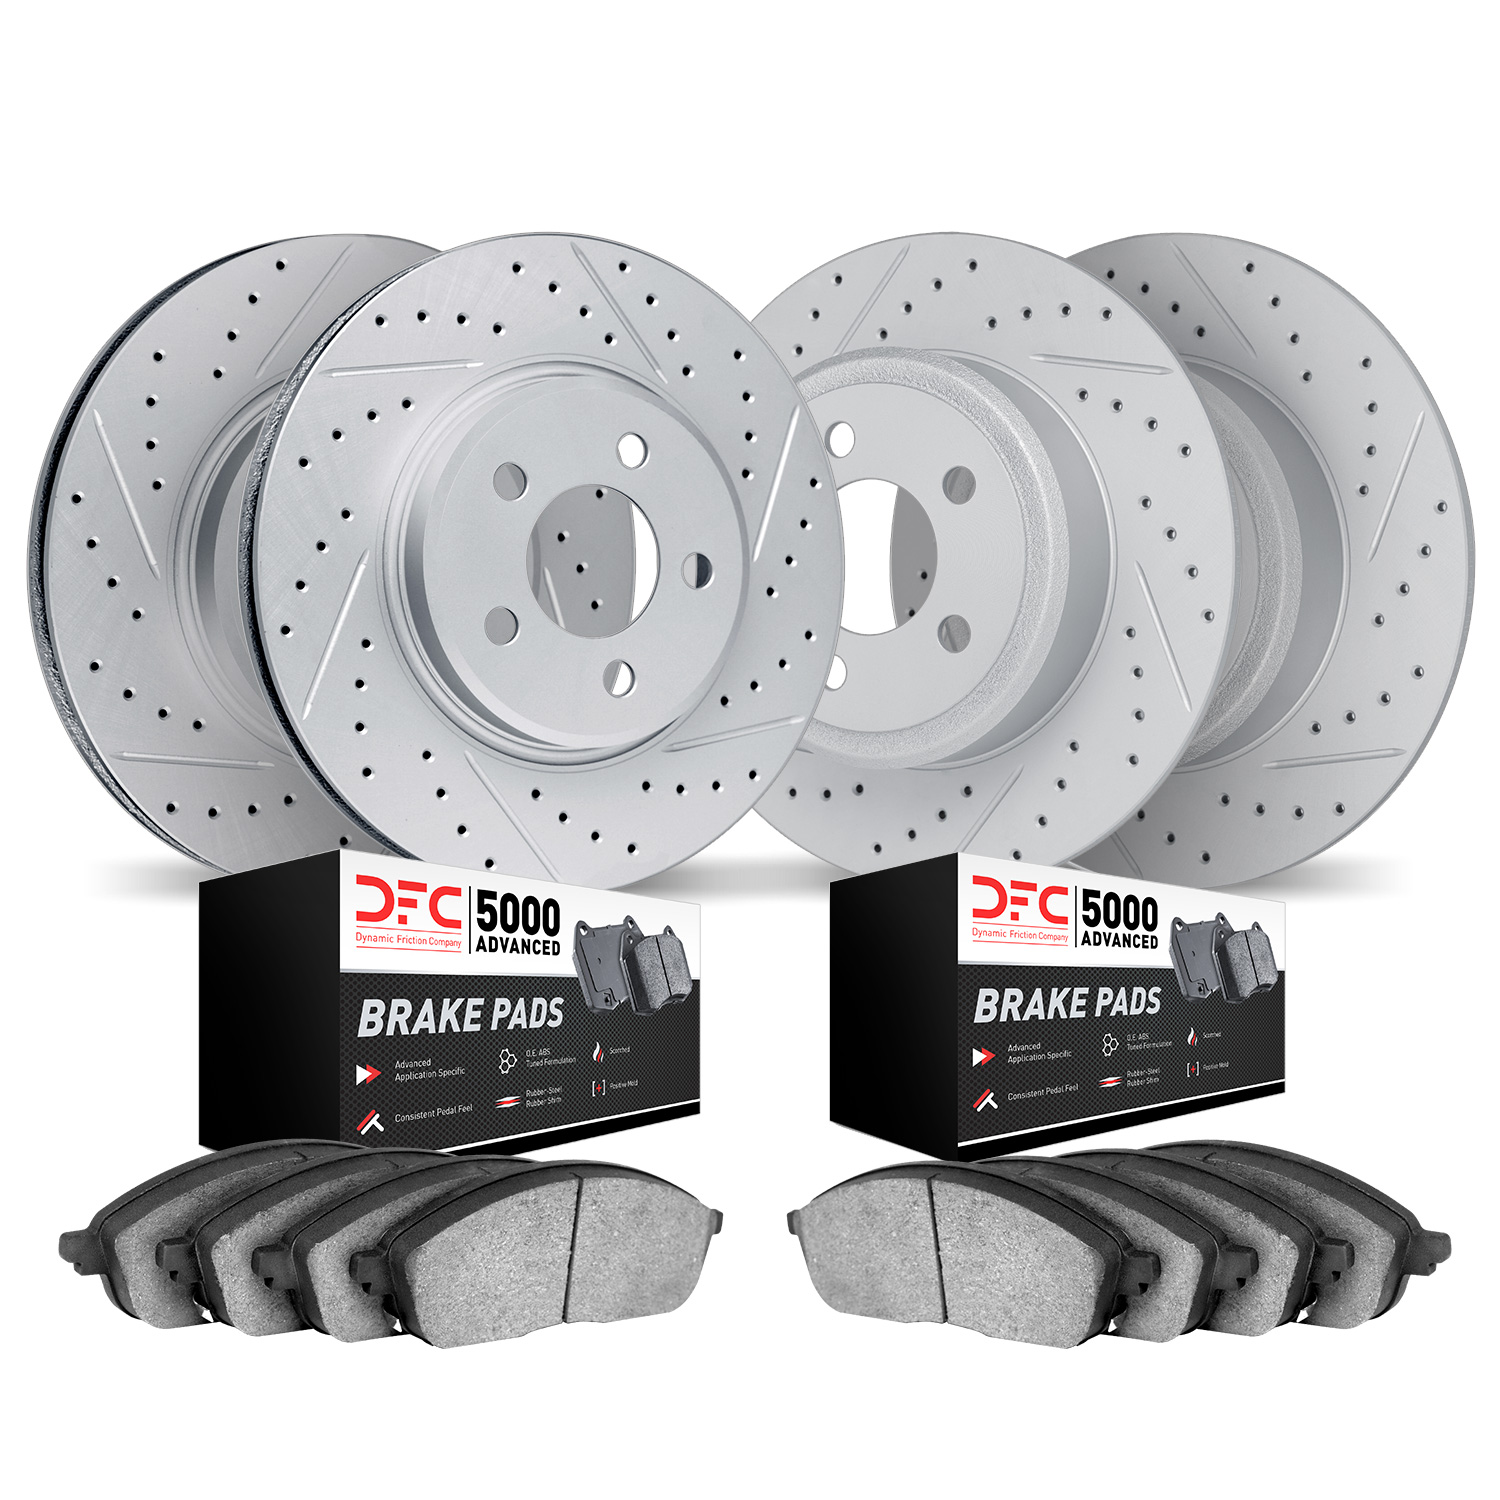 2504-72025 Geoperformance Drilled/Slotted Rotors w/5000 Advanced Brake Pads Kit, 2005-2006 Mitsubishi, Position: Front and Rear